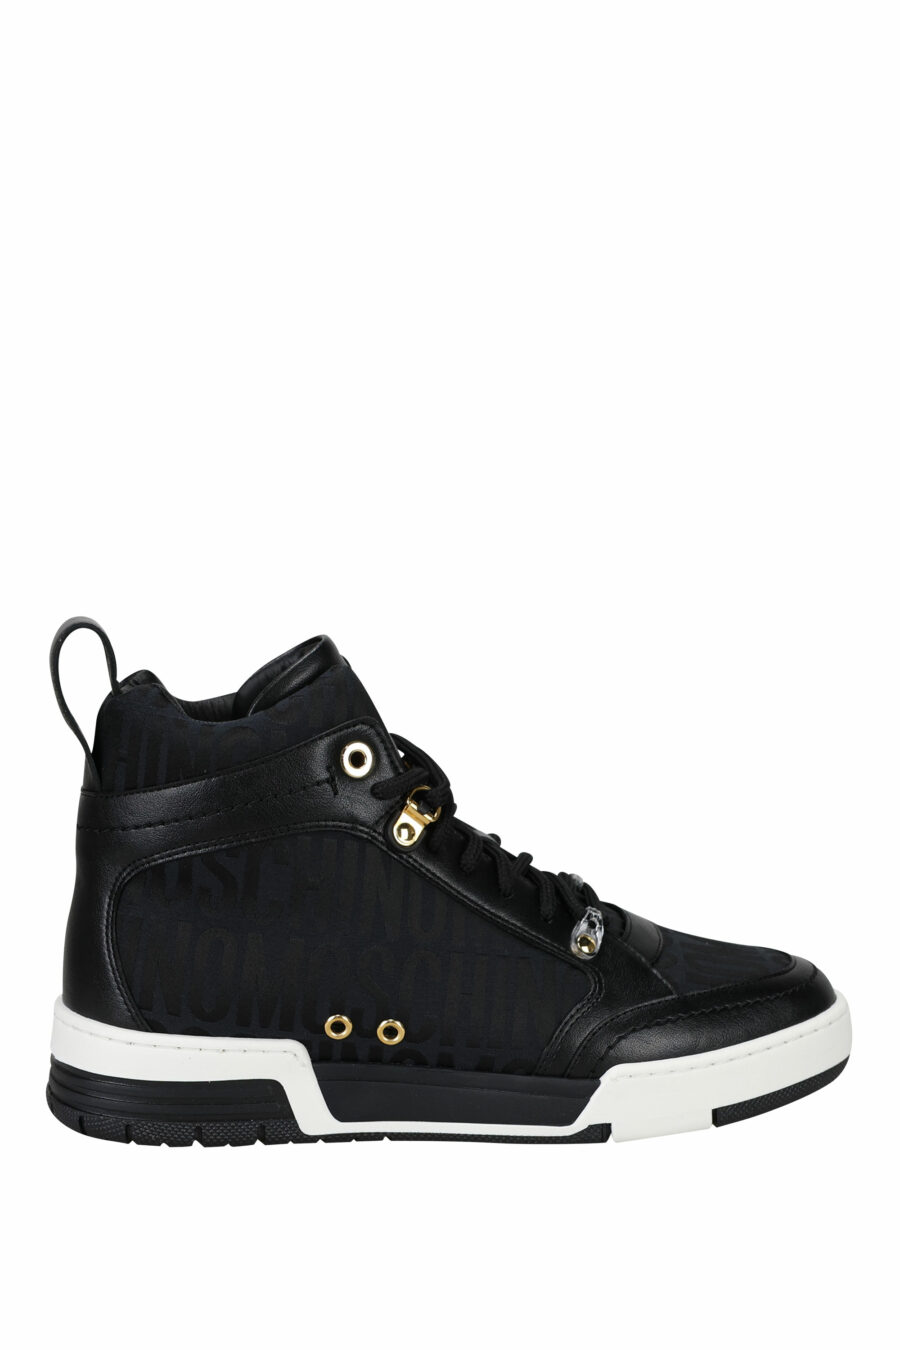 Black "all over logo" high top trainers with white sole - 8054653825758